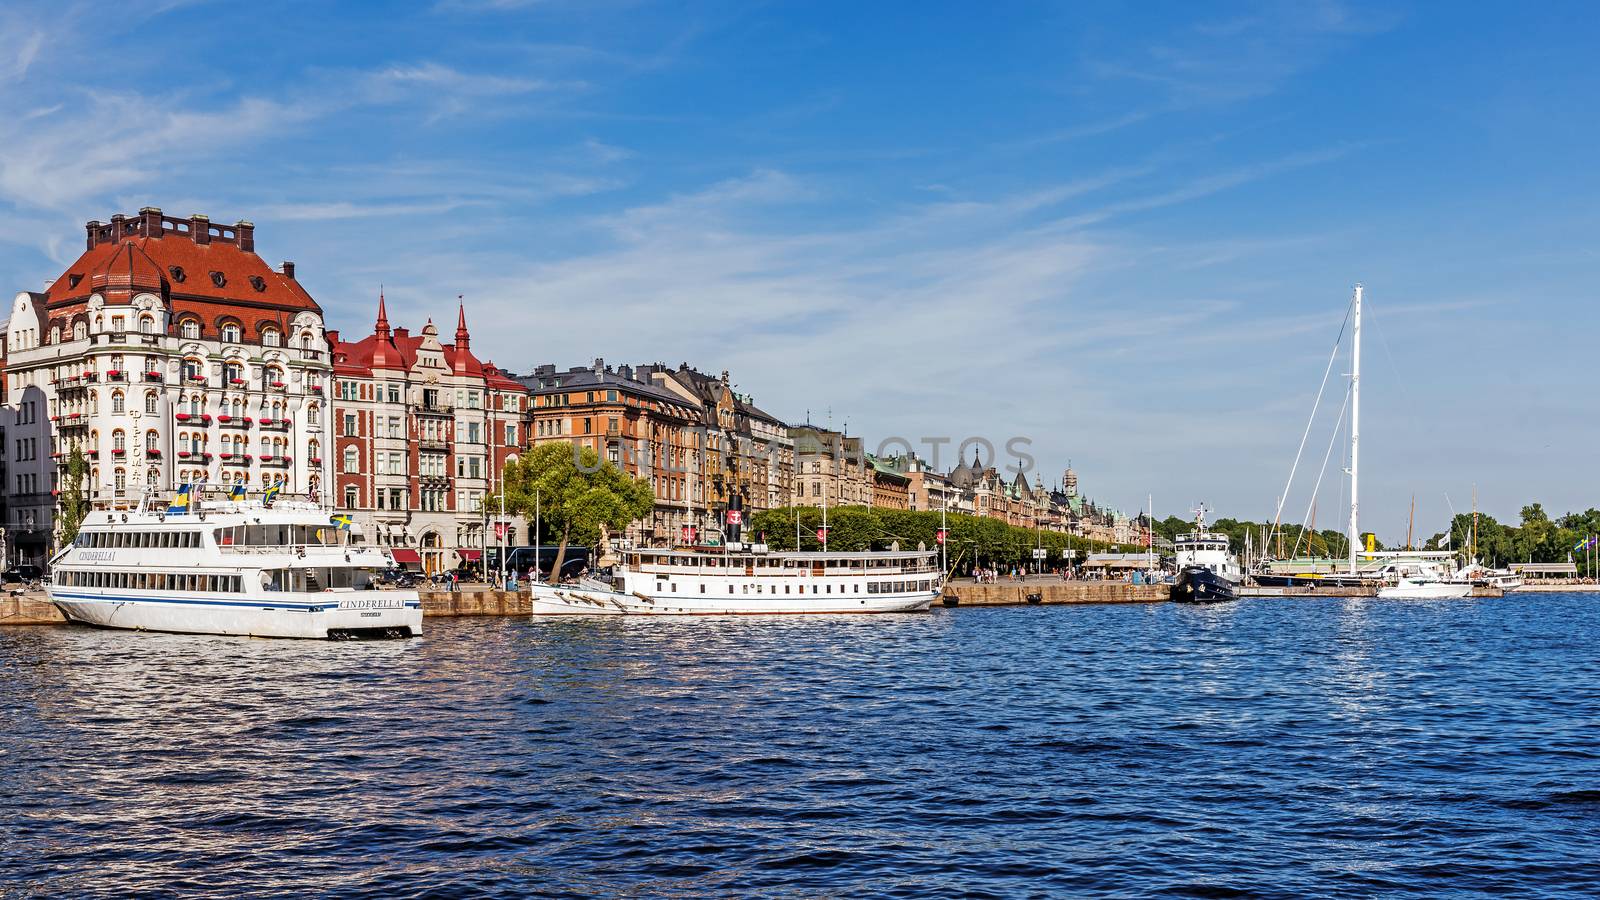 Scenes from Strandvagen, a boulevard in Ostermalm district in Stockholm. Completed for the Stockholm World's Fair in 1897, nowadays considered the most prestigious avenue in town.